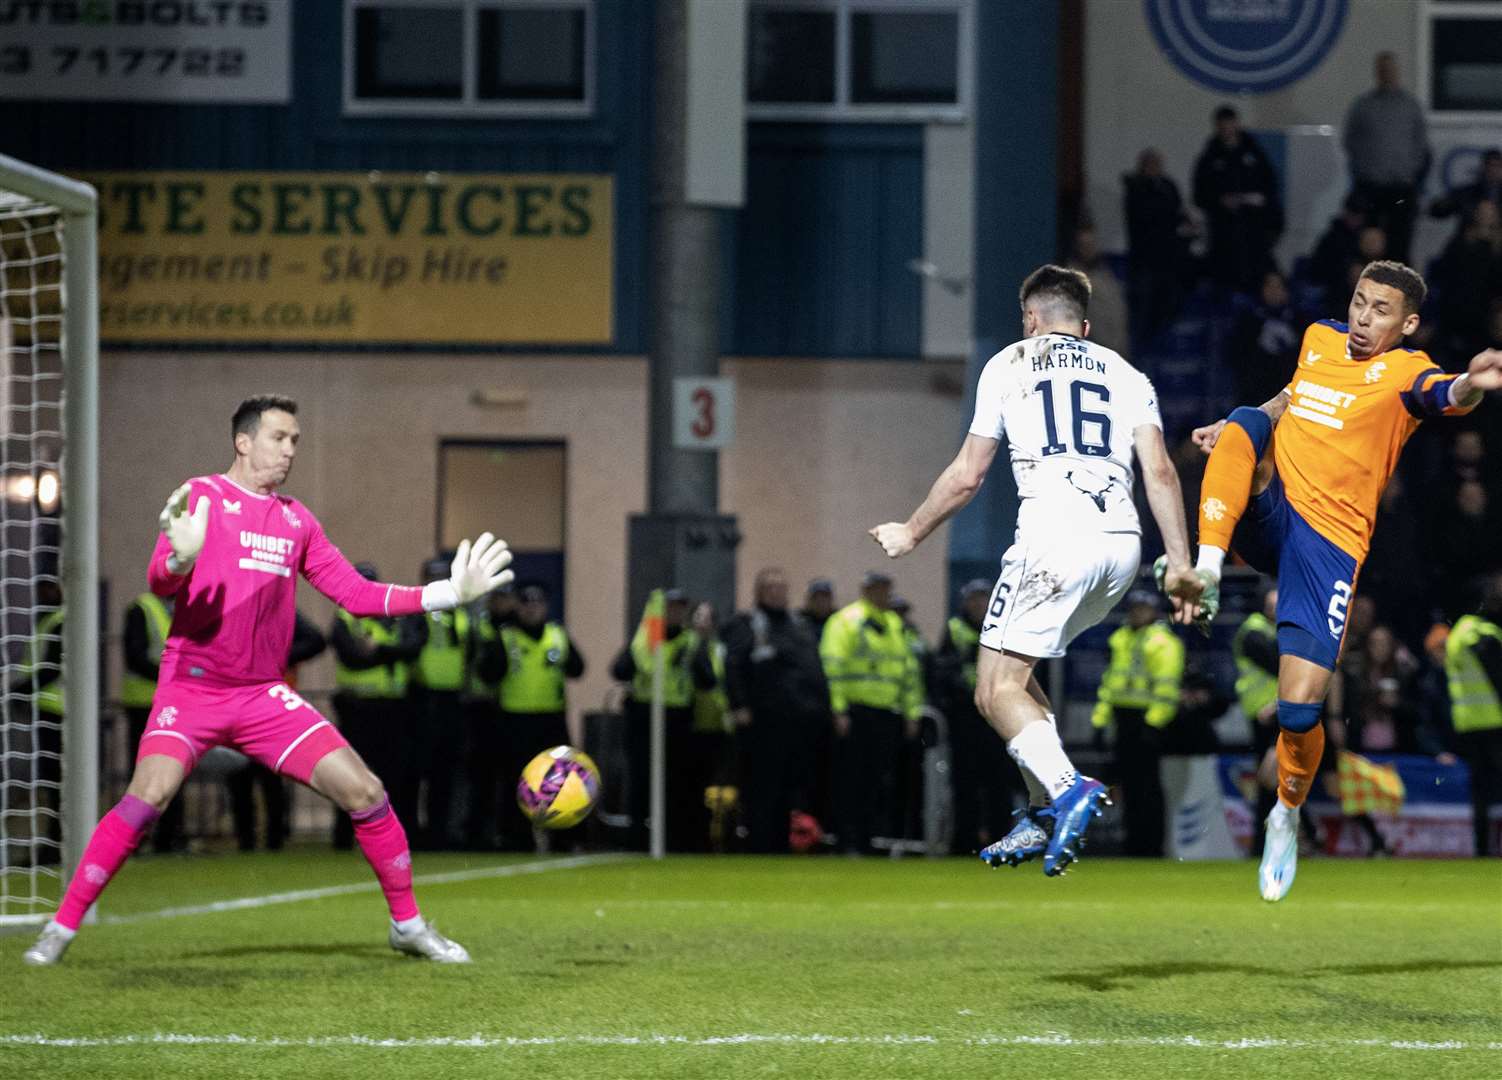 George Harmon missed a glorious chance to open the scoring for Ross County against Rangers. Picture: Ken Macpherson